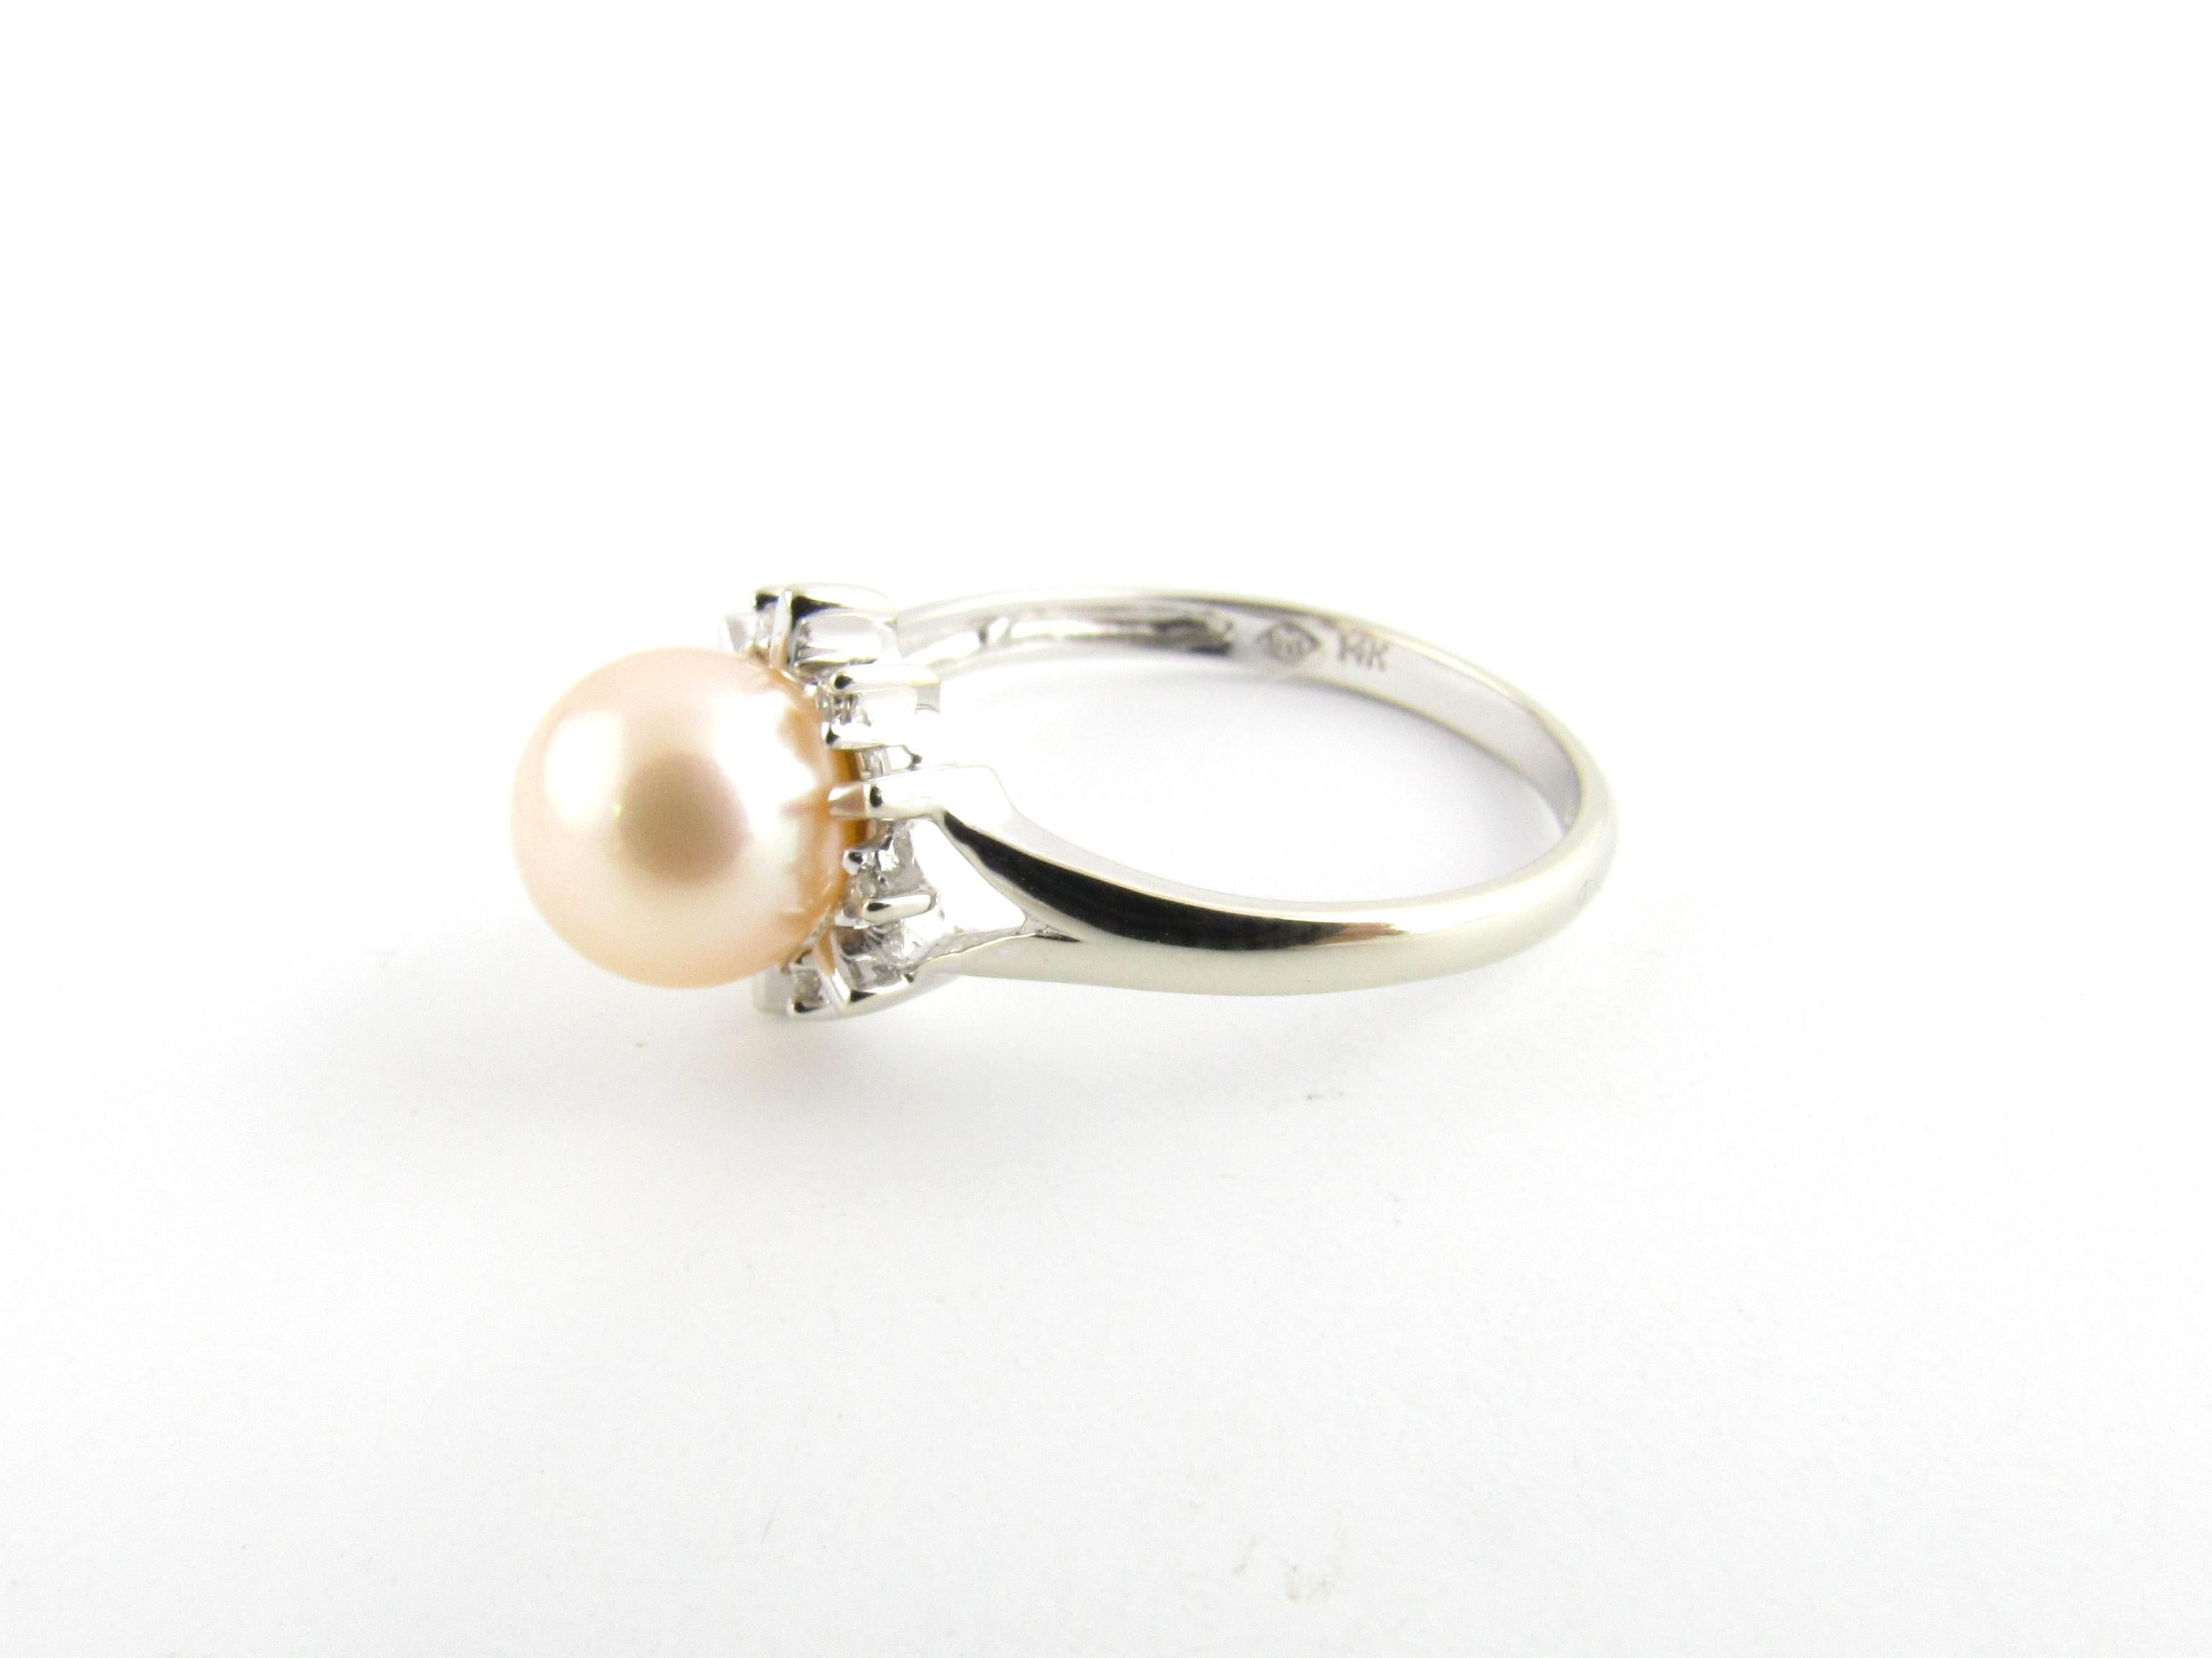 Vintage 14 Karat White Gold Pearl and Diamond Ring Size 7

This elegant ring features one 6 mm pearl surrounded by six round single-cut diamonds. Shank: 2 mm.

Approximate total diamond weight: .03 ct.

Diamond color: H

Diamond clarity: SI1

Ring